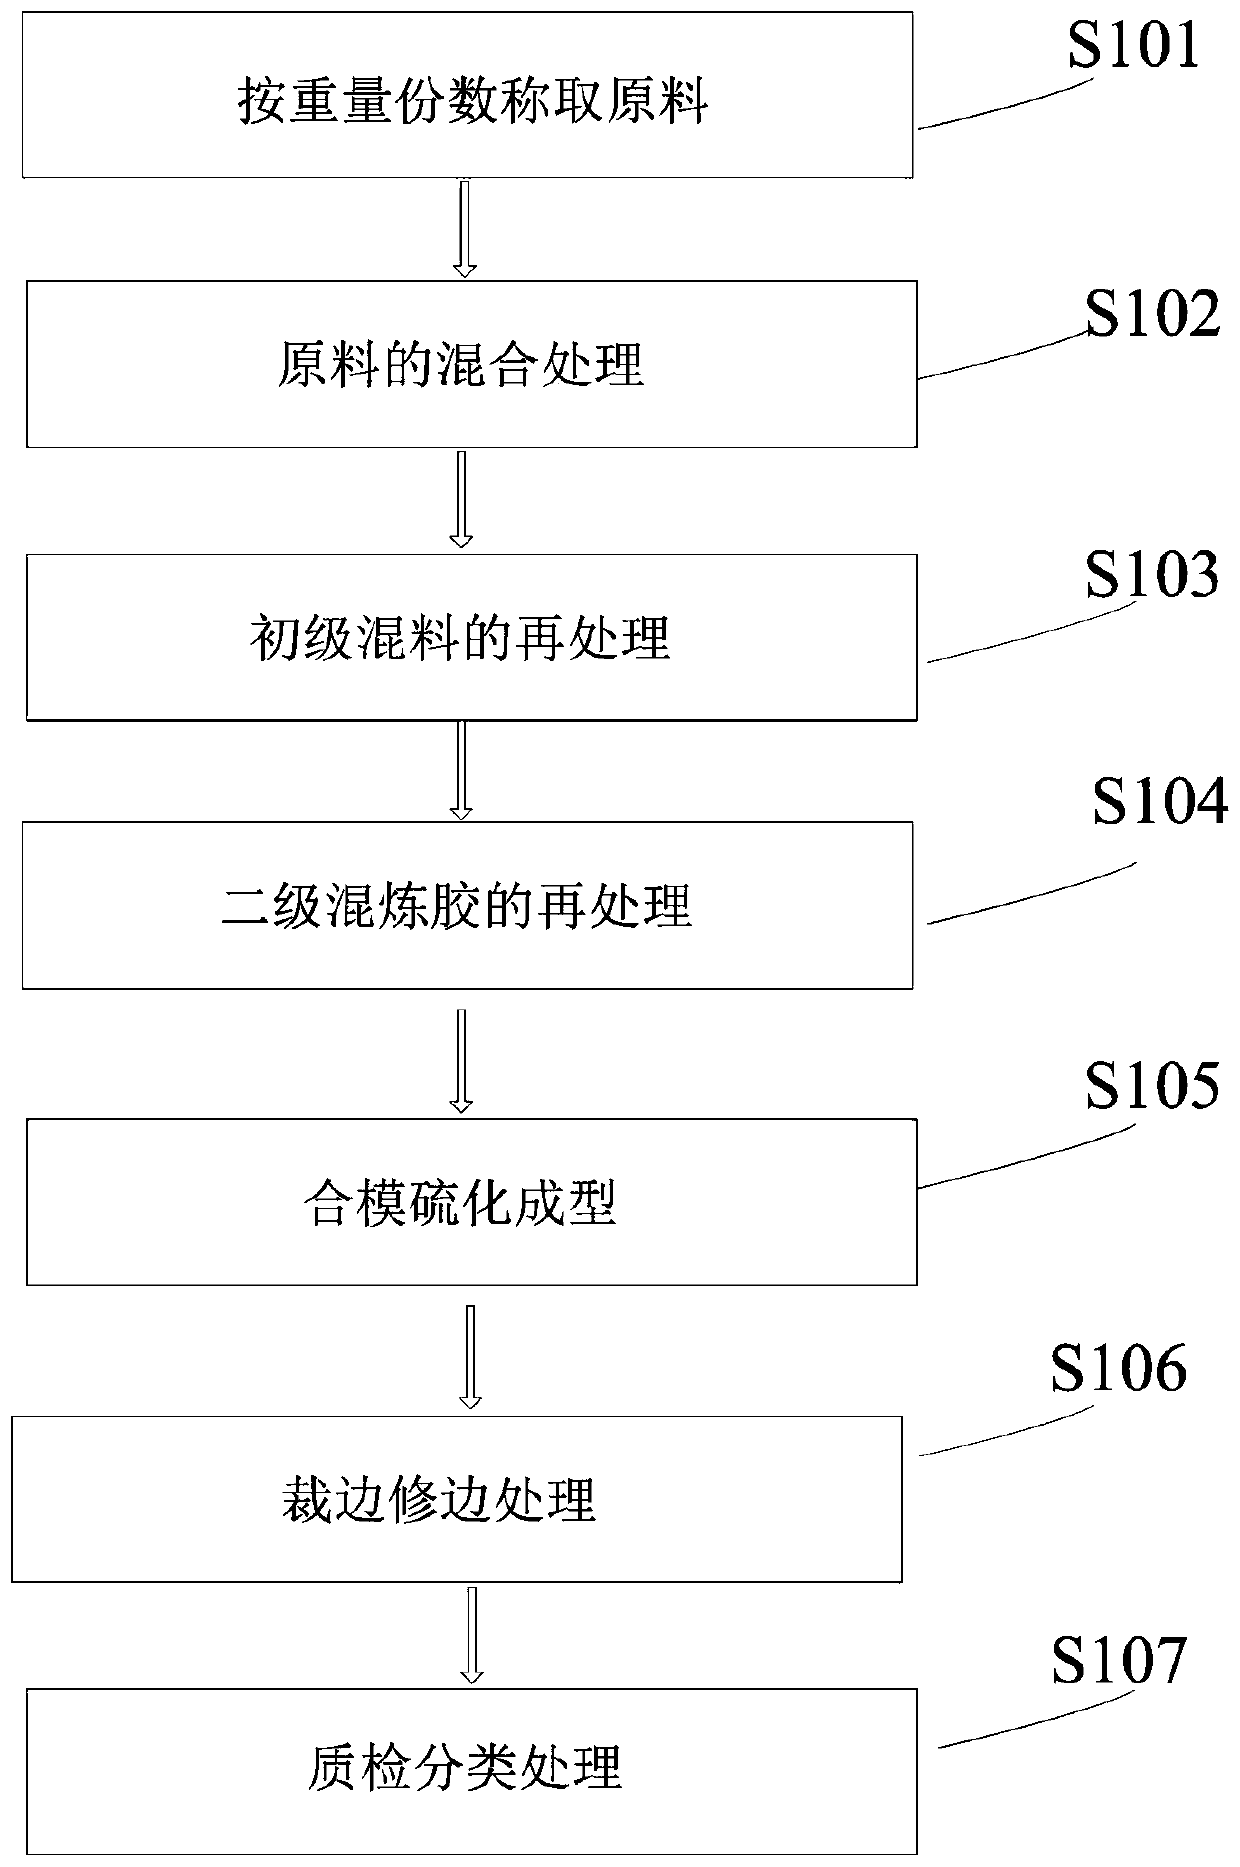 Anti-aging rubber sealing ring material and preparation method thereof